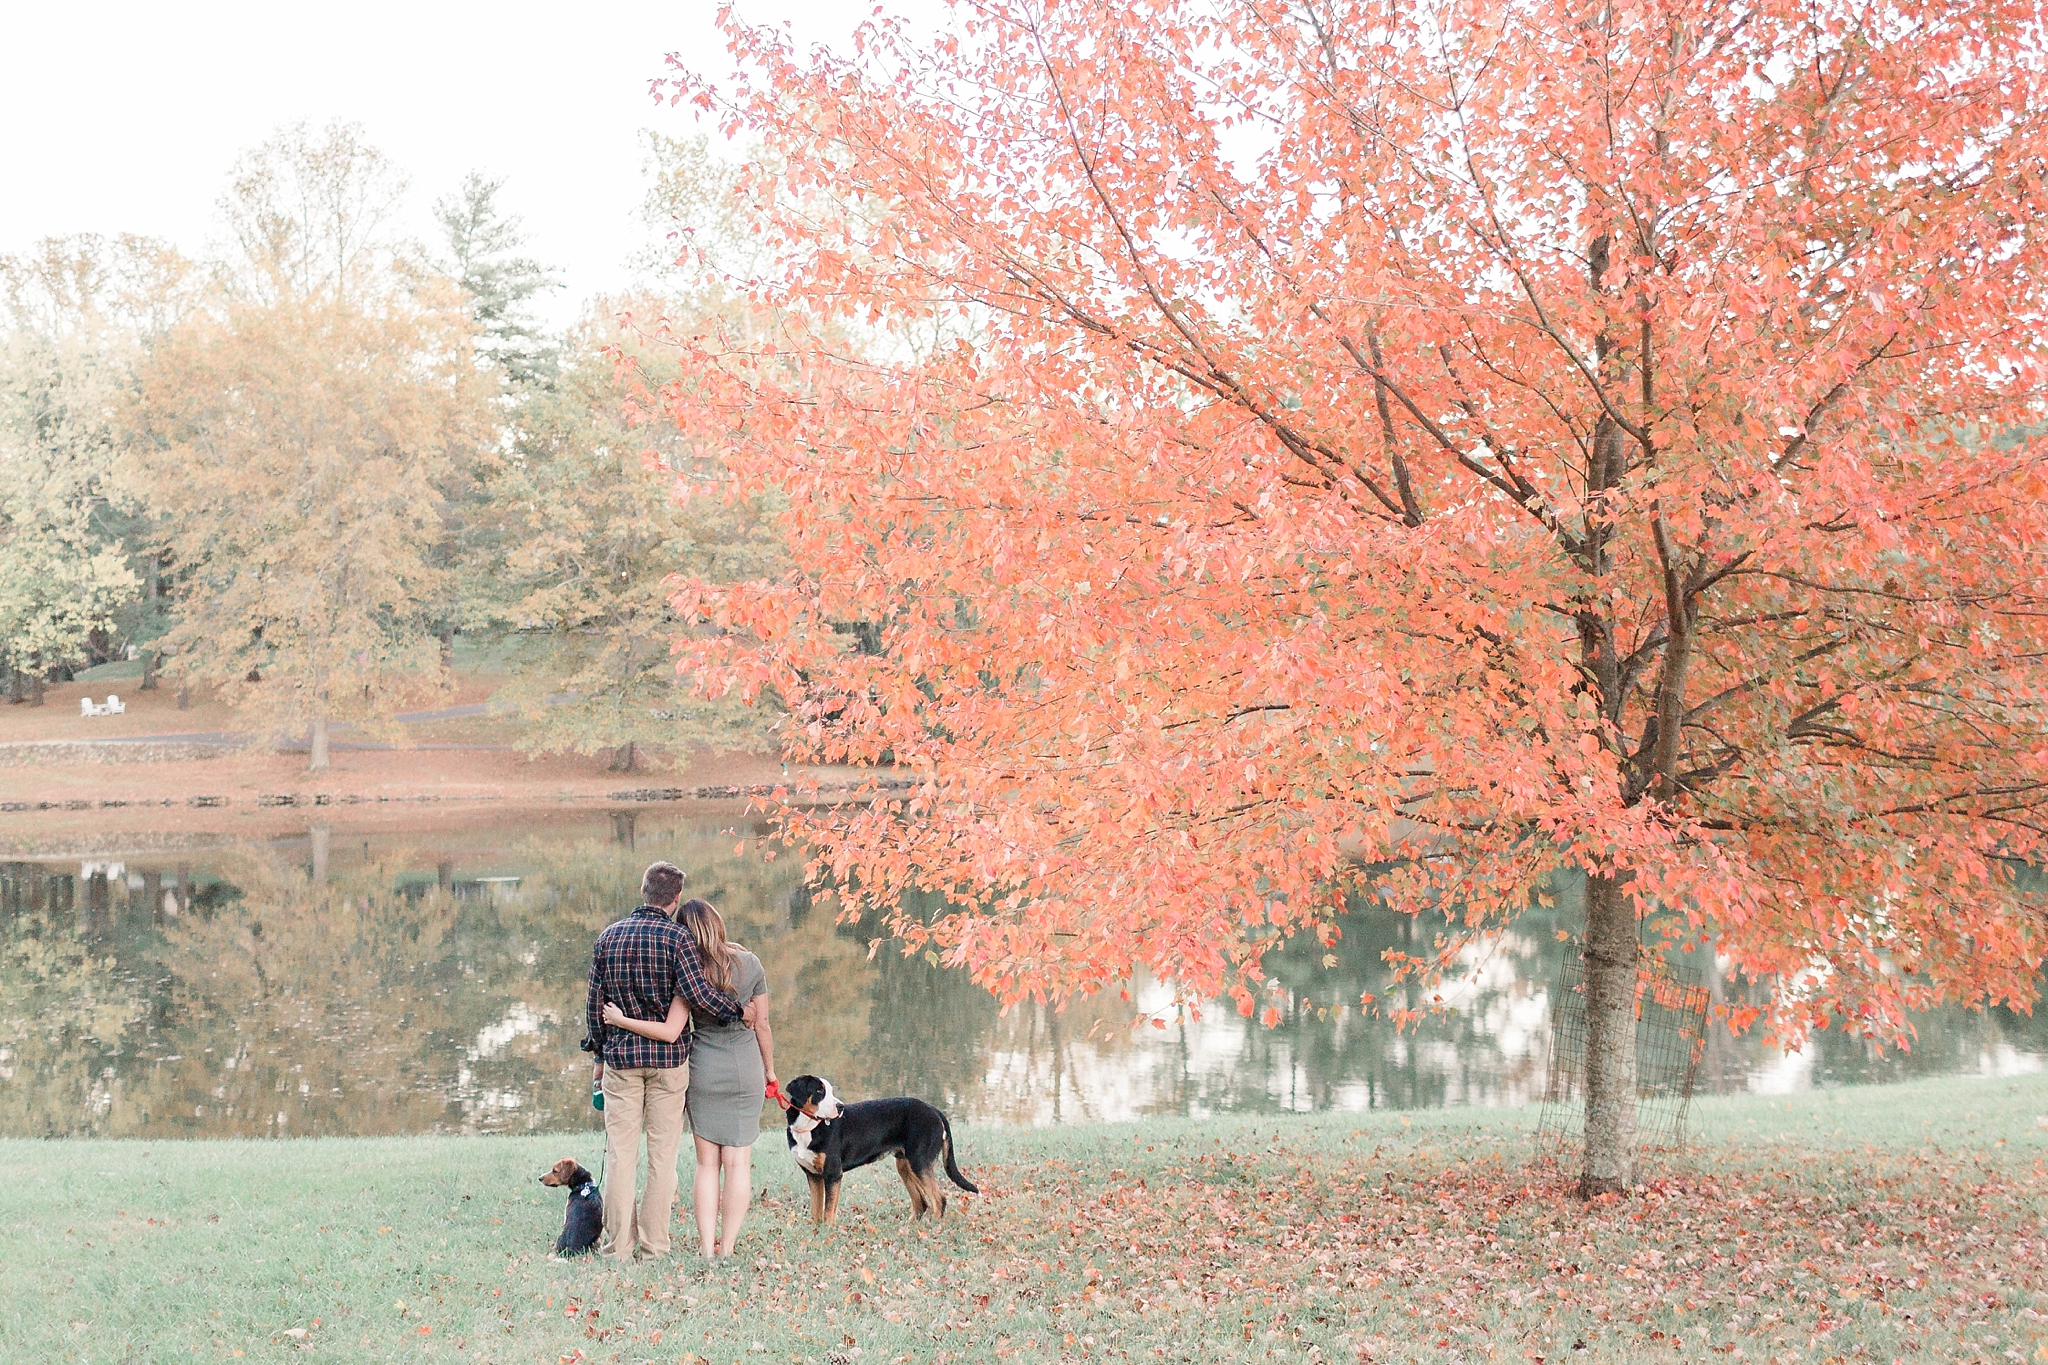 A stunning fall engagement session at Airlie Center in Warrenton, VA as photographed by Washington, DC wedding photographer, Alicia Lacey.